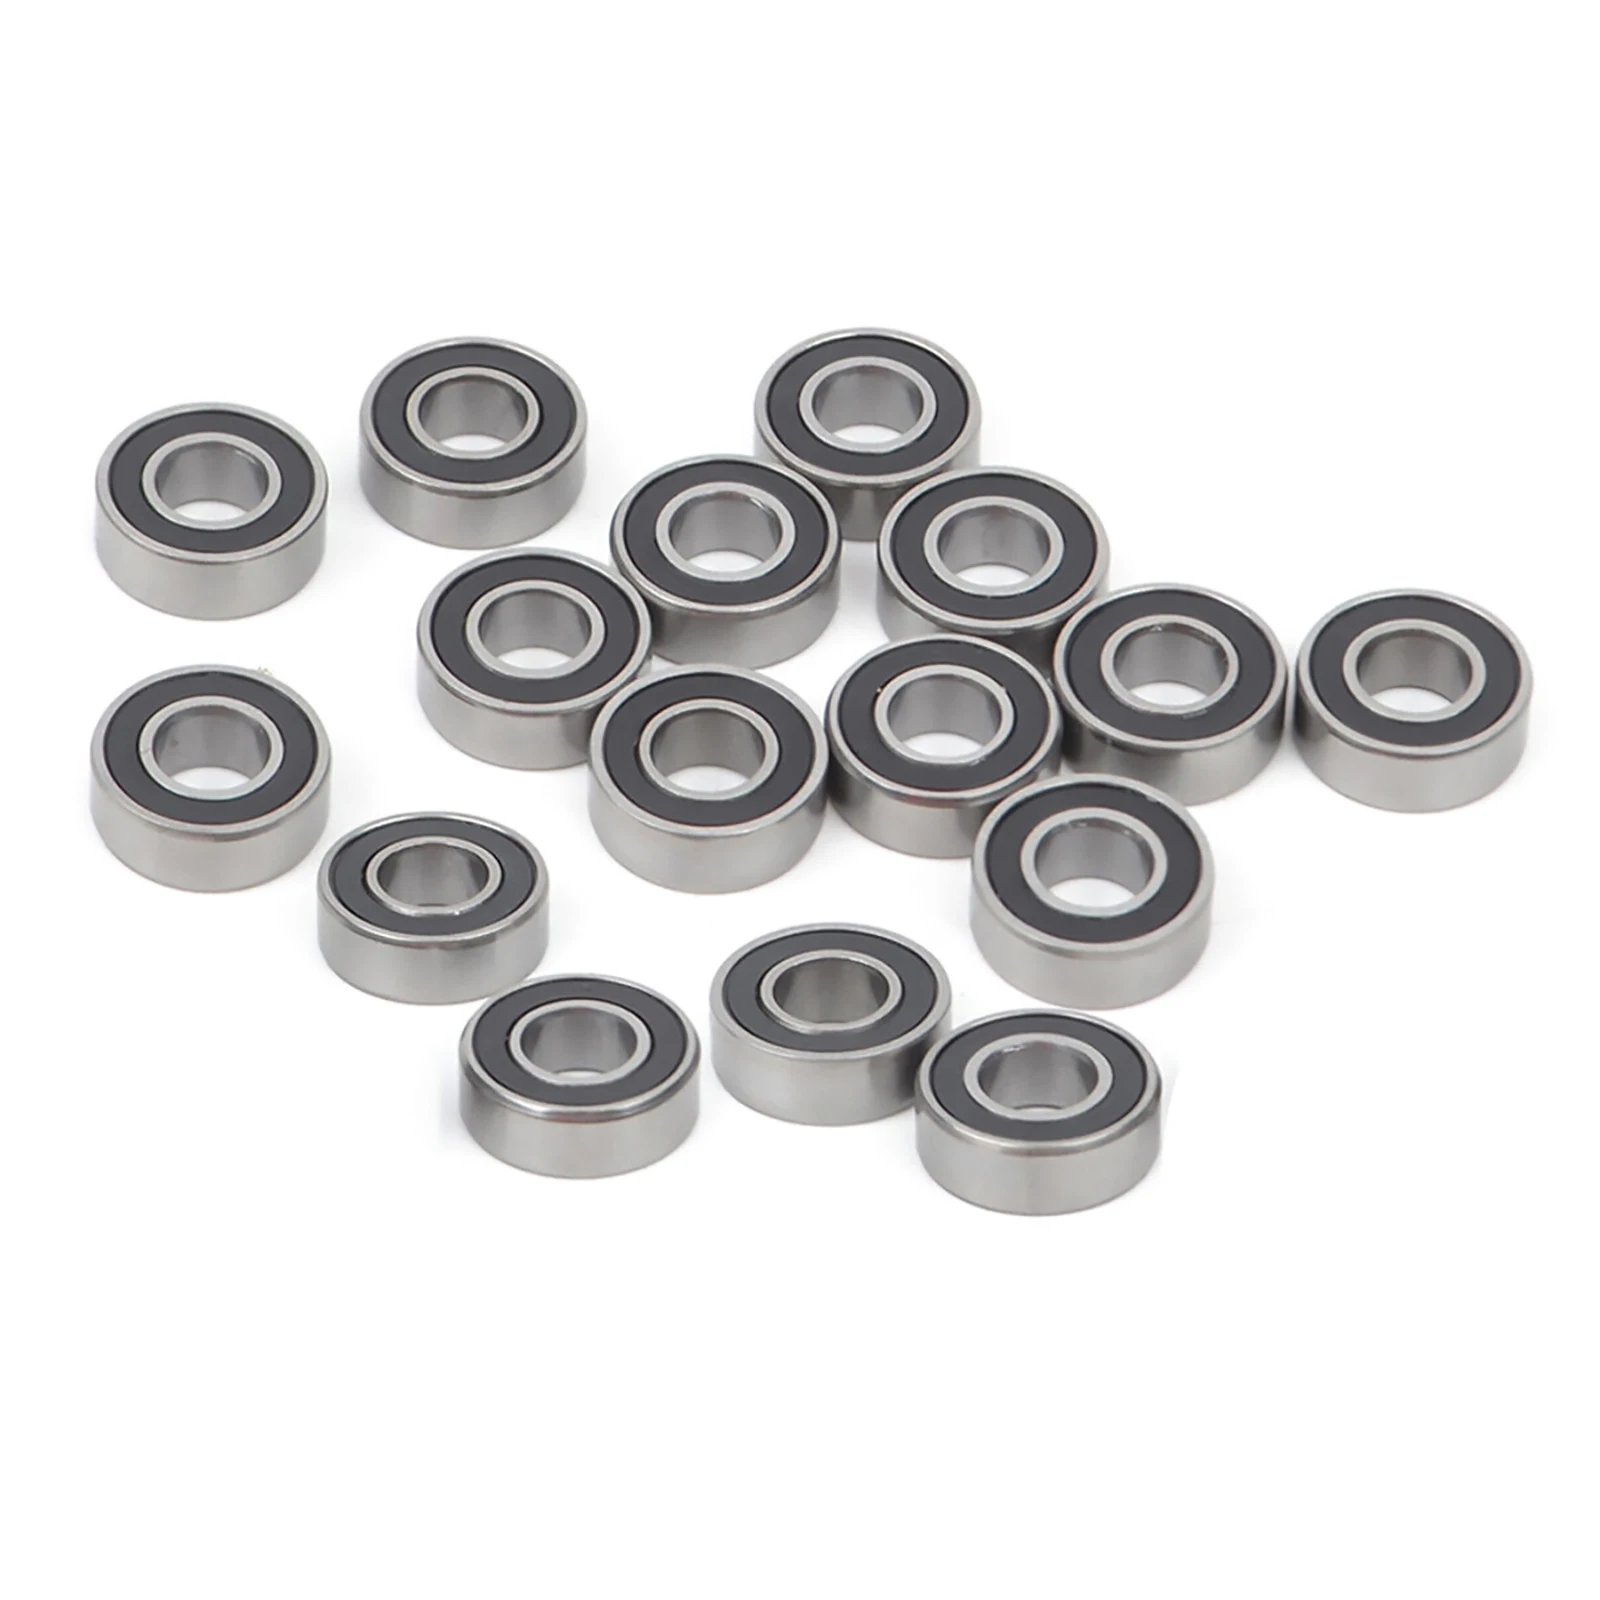 

16Pcs/Set Steel Ball Bearing For Tamiya 2WDH BBX BB-01 BB01 1/10 RC Off-road Vehicle Car Accessories Replacement Upgrade Parts